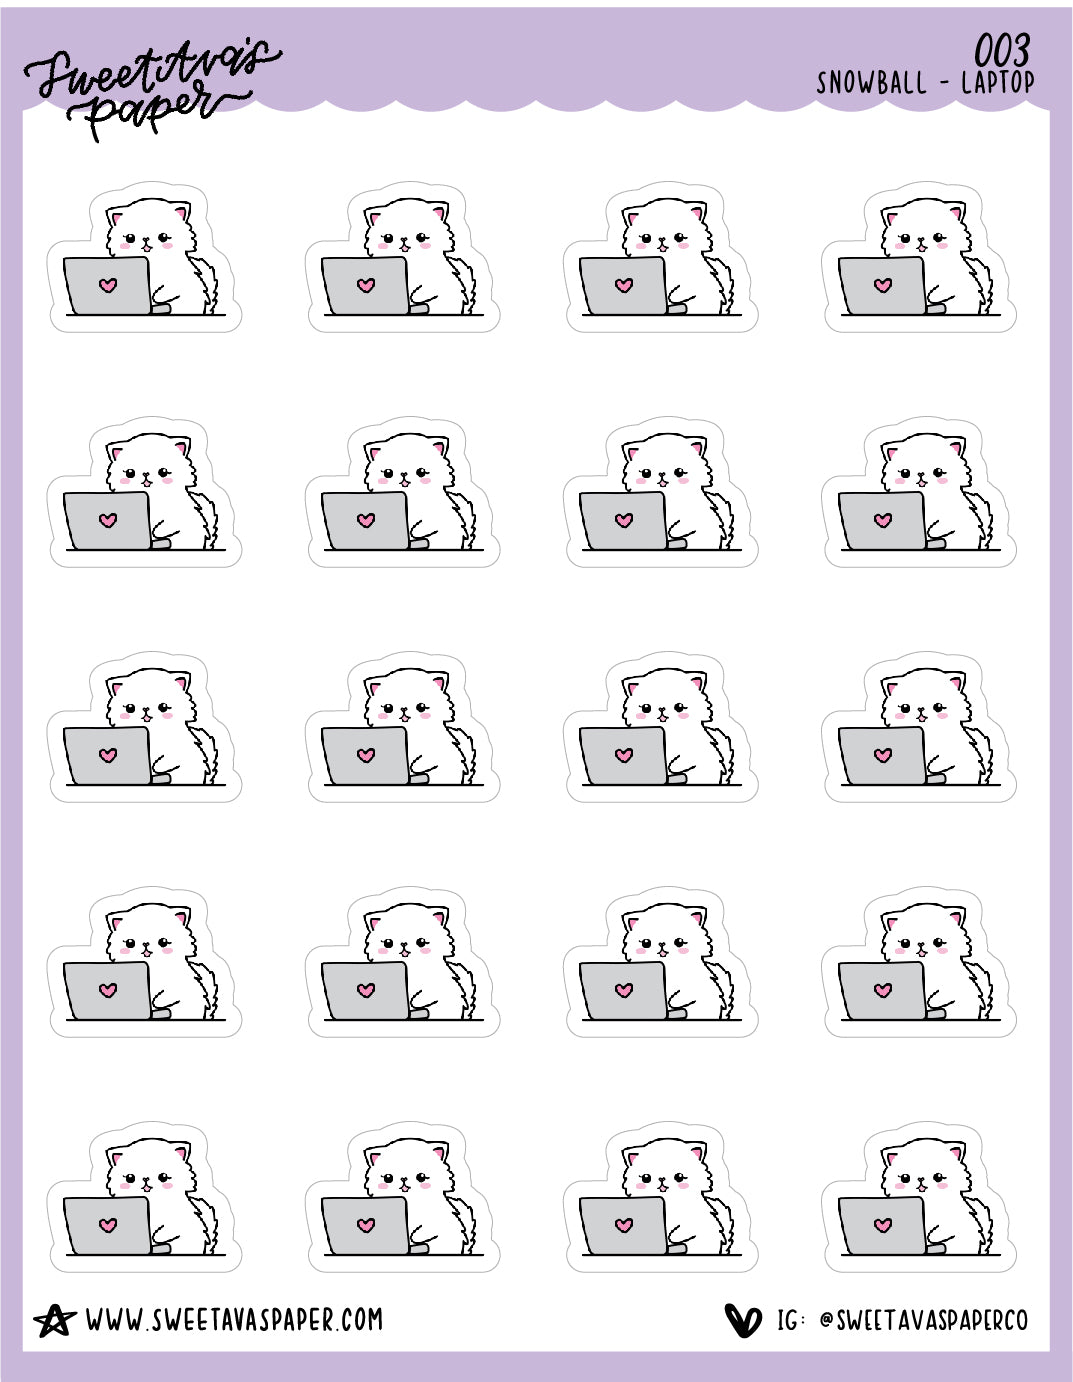 Cat on Laptop Stickers - Snowball The Cat - [003]